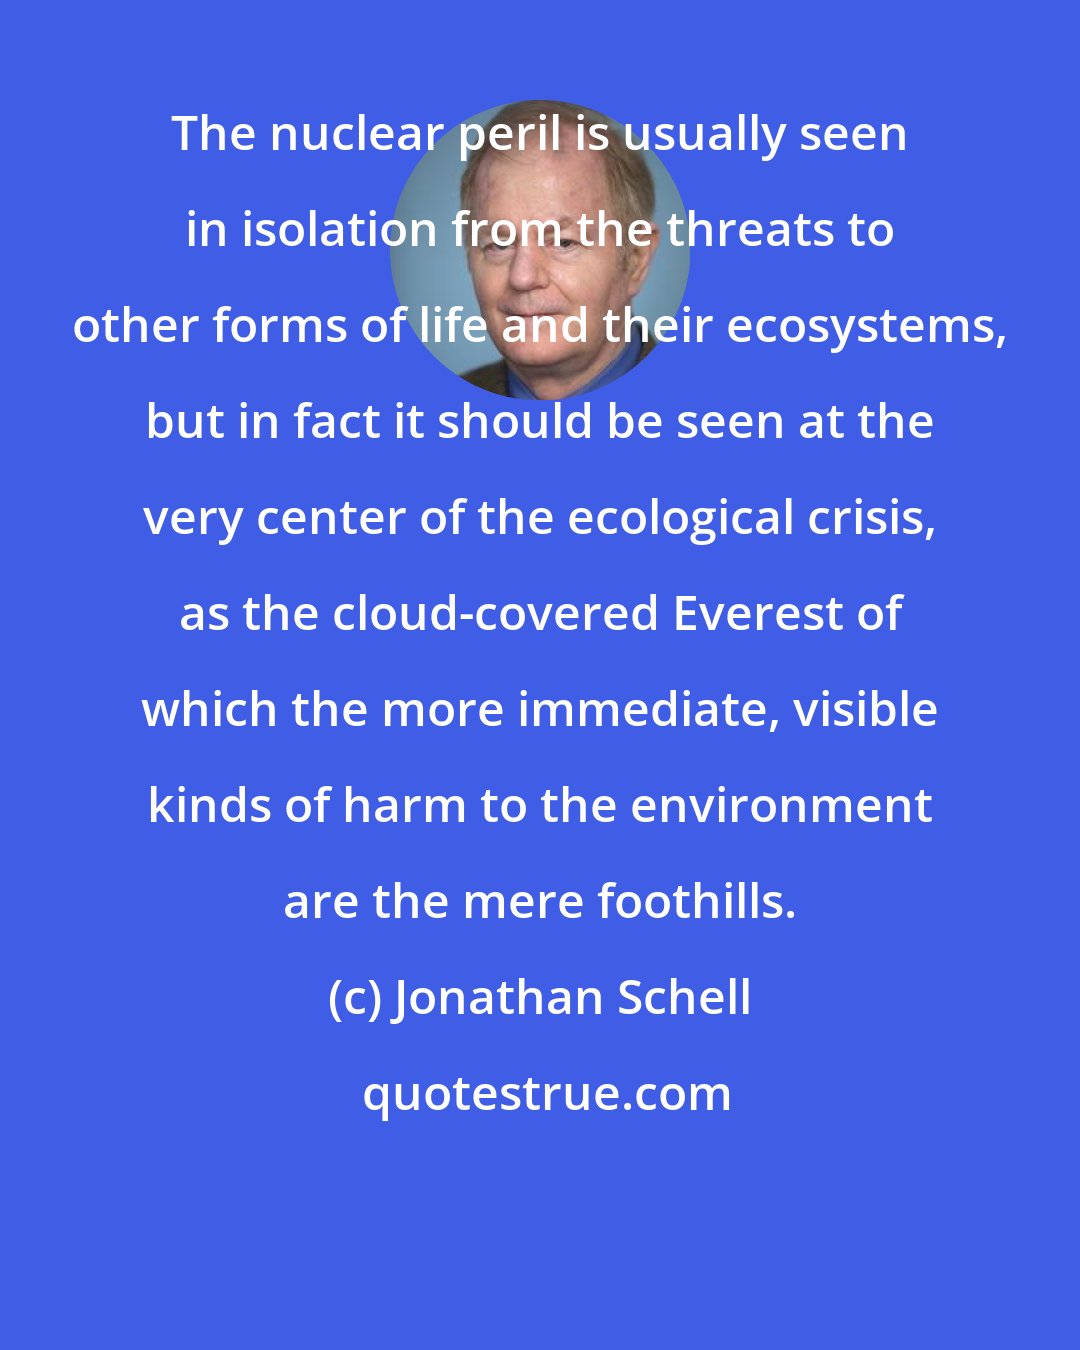 Jonathan Schell: The nuclear peril is usually seen in isolation from the threats to other forms of life and their ecosystems, but in fact it should be seen at the very center of the ecological crisis, as the cloud-covered Everest of which the more immediate, visible kinds of harm to the environment are the mere foothills.